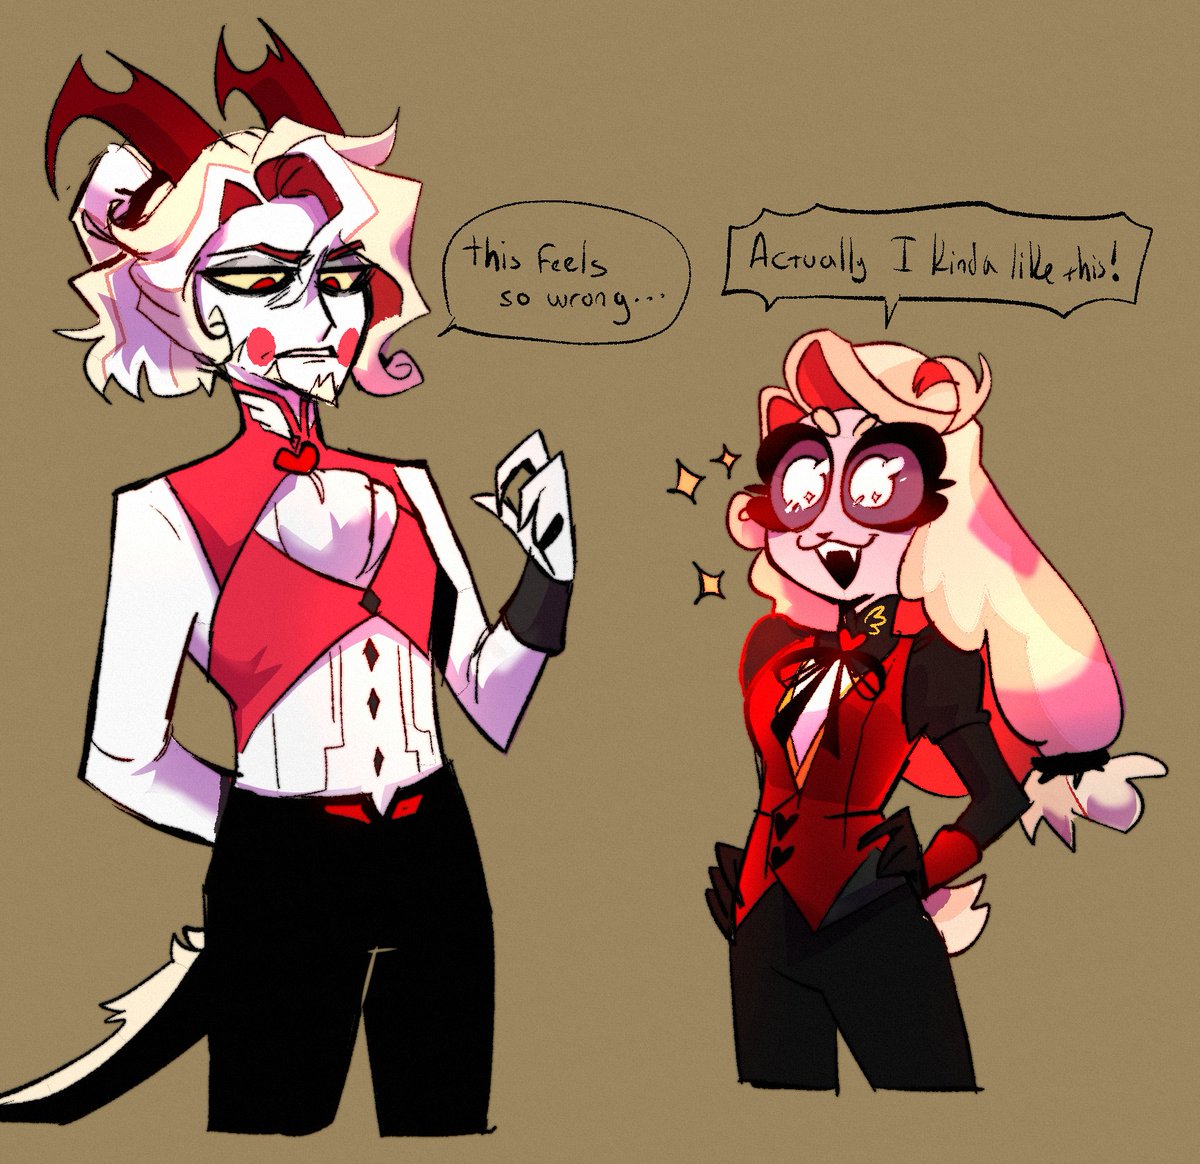 Color-Swap Constantine and Charlie.

#HazbinHotelCharlie #HazbinHotelOC #HazbinHotelConstantine